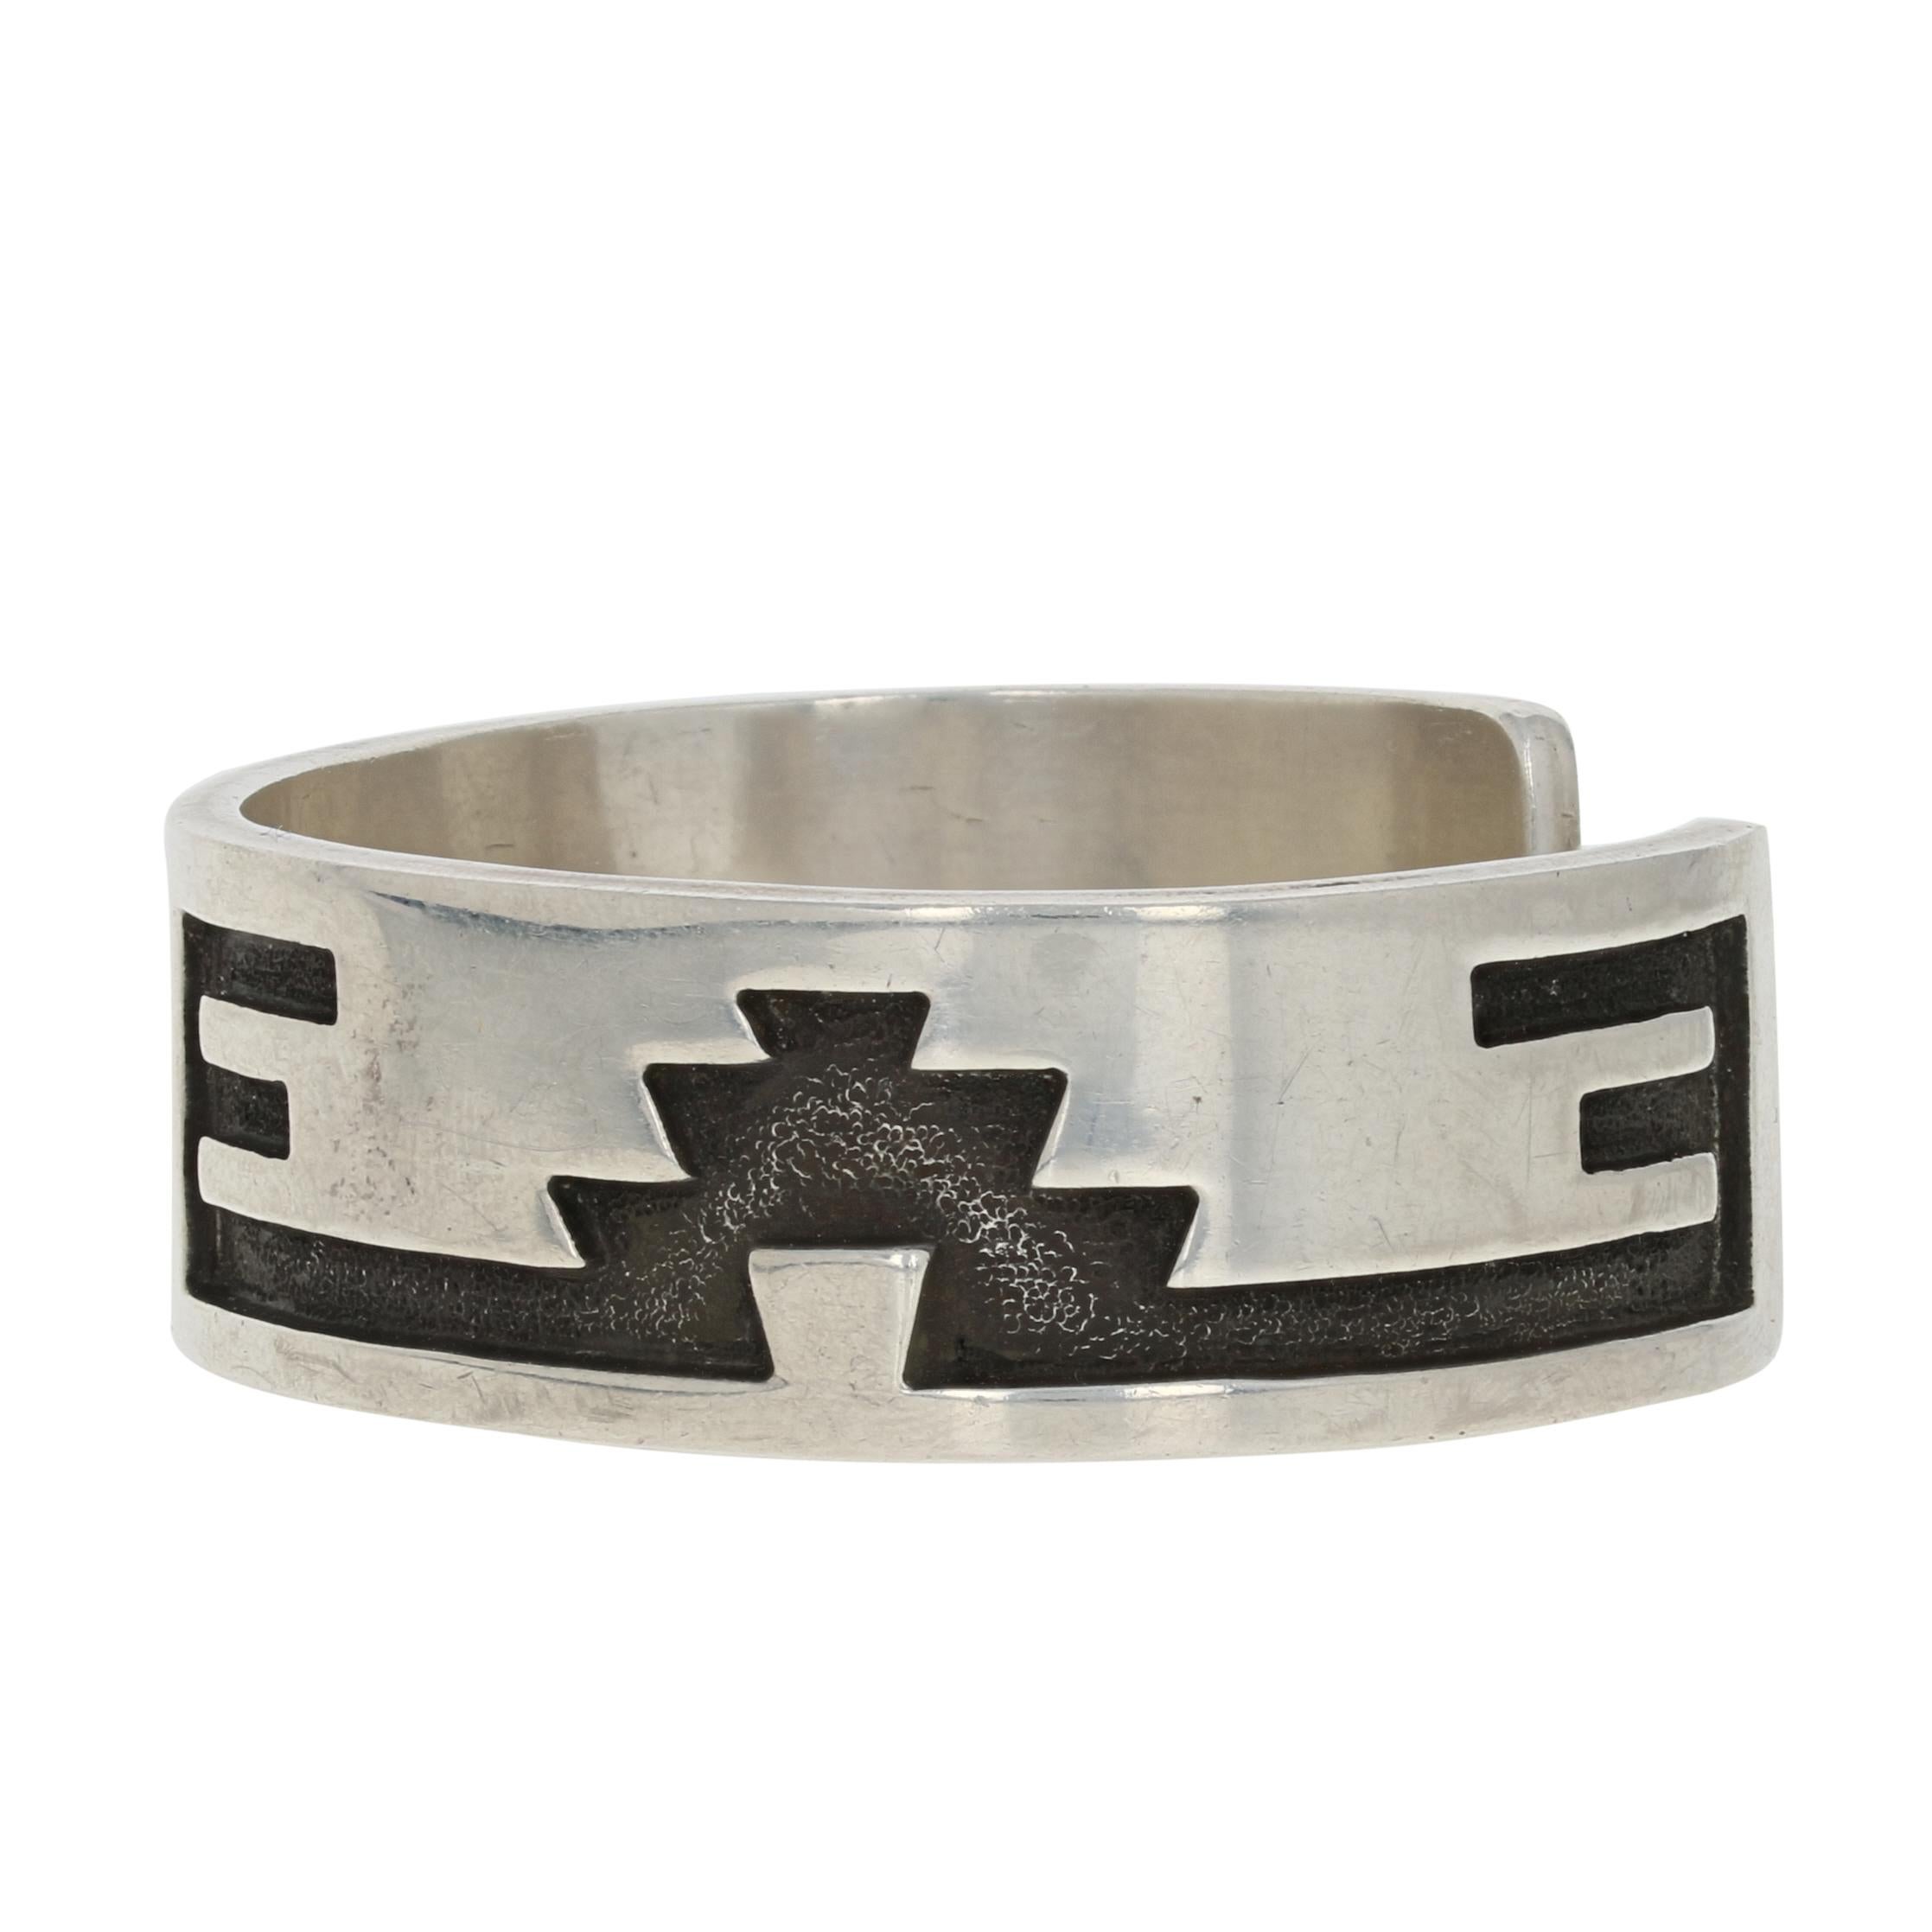 Native American
 Artisan's Signature: JLC
 
 Metal Content: Guaranteed Sterling Silver as stamped
 
 Bracelet Style: Cuff
 Measurements: 6